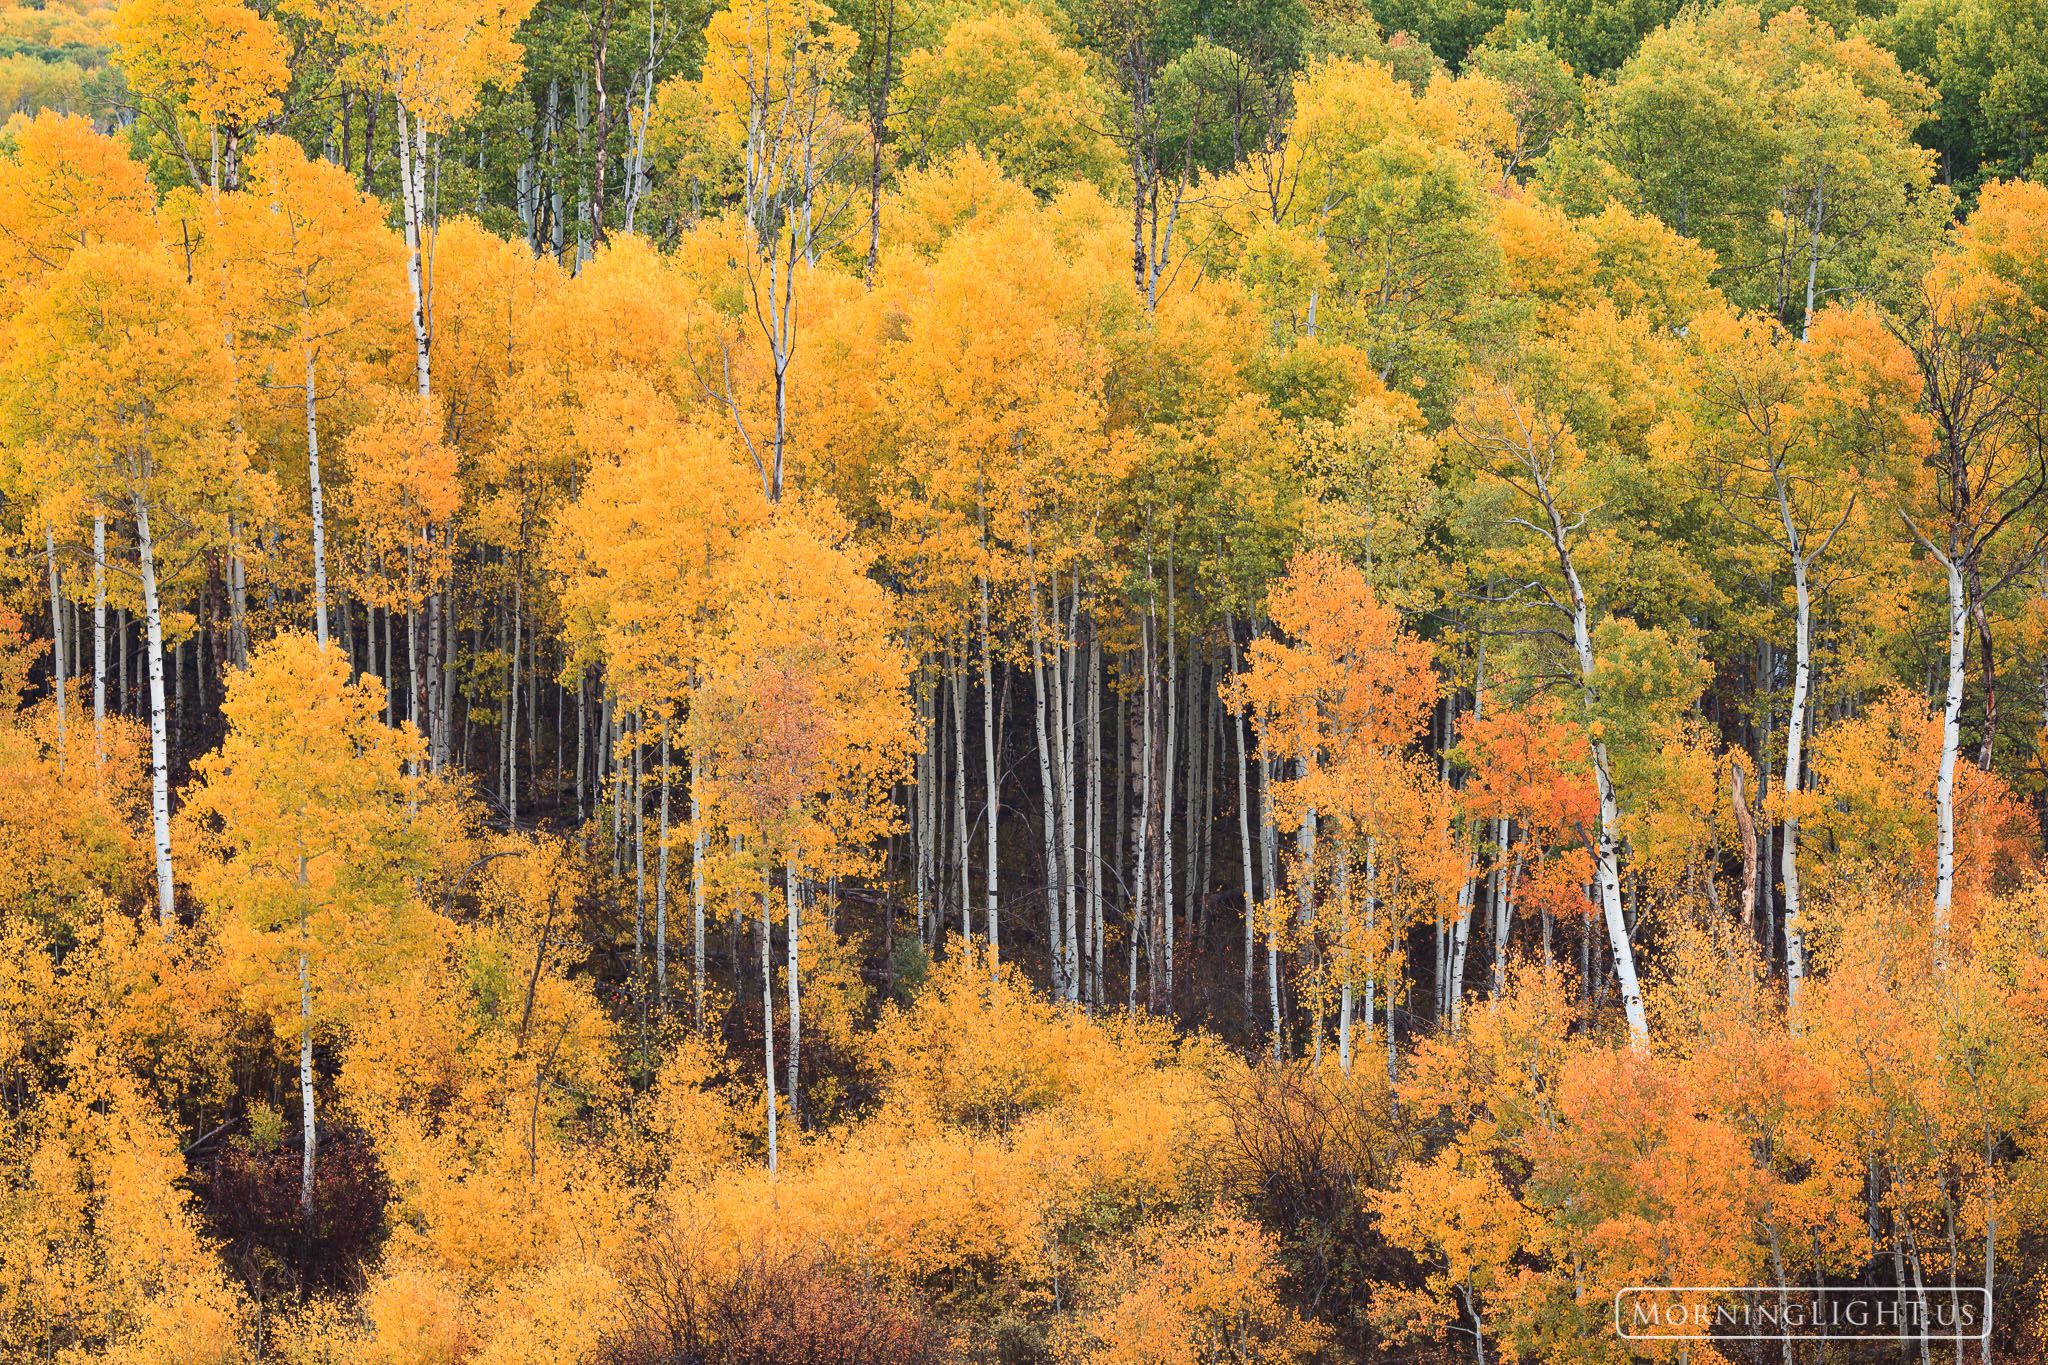 This is a classic view from McClure Pass, Colorado with beautiful white aspen standing tall and surrounded by vibrant colors...